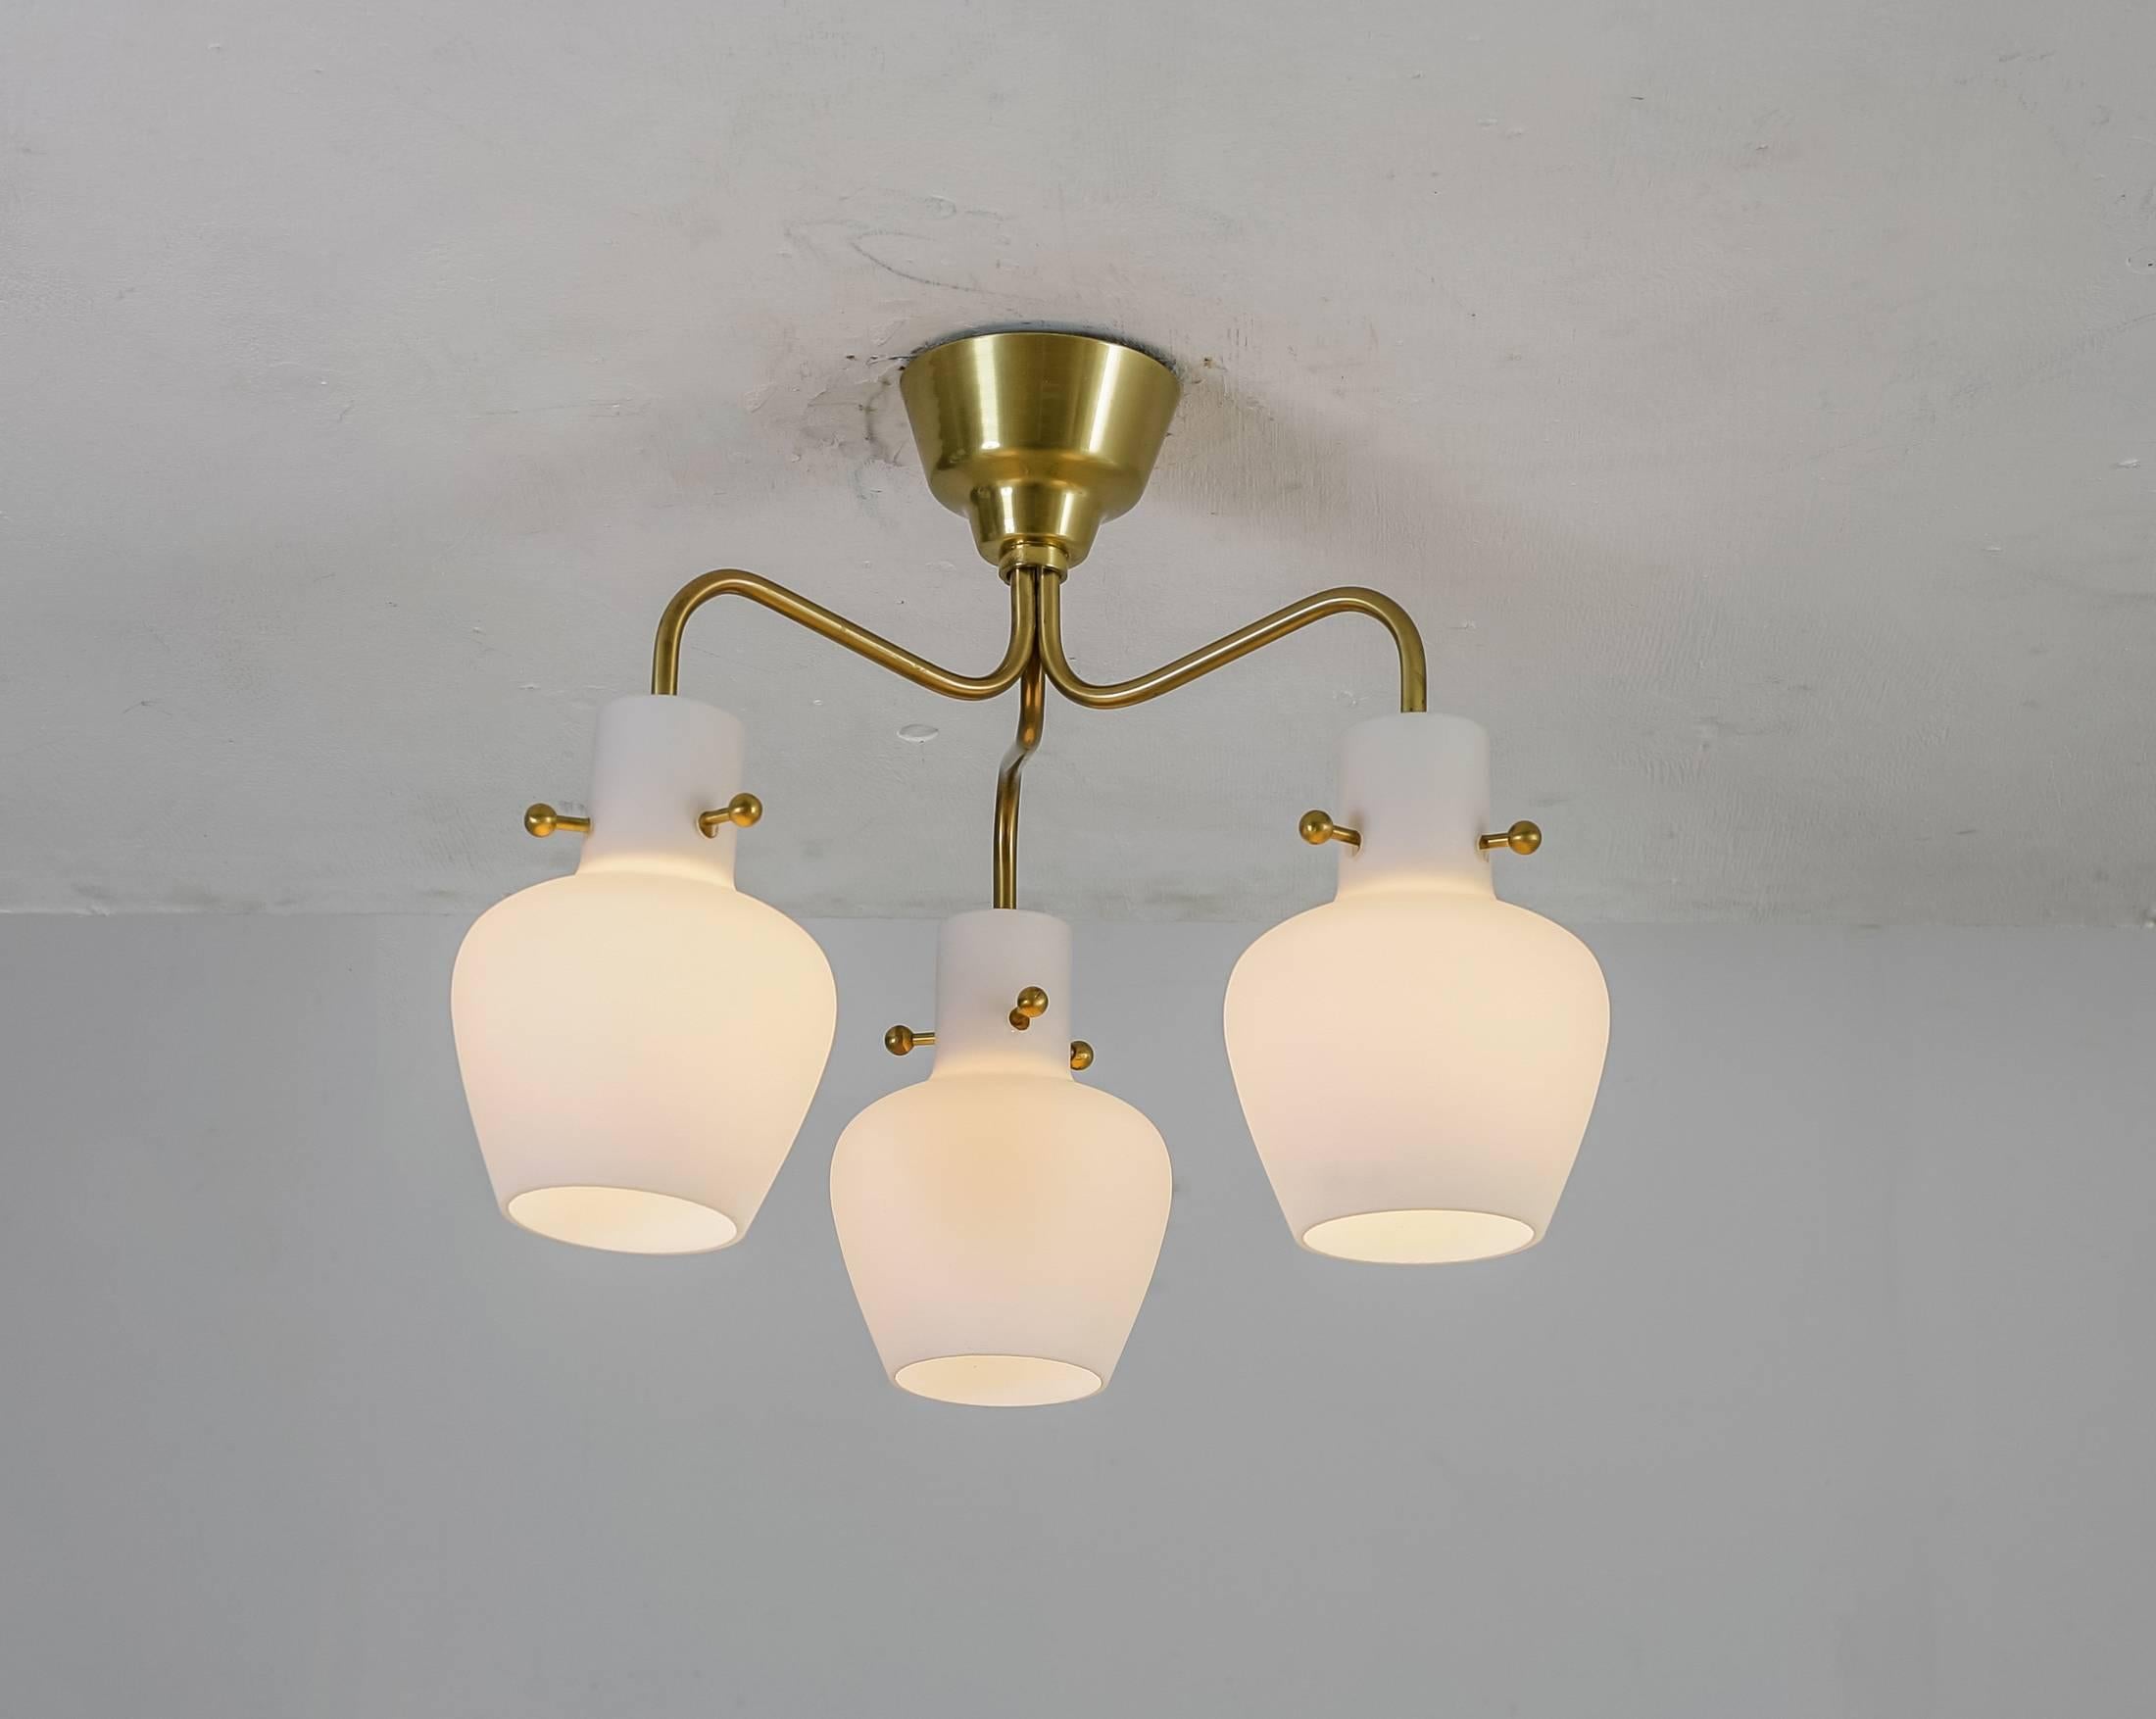 A three shaded flushmount chandelier by Hans Bergström for Ateljé Lyktan, Sweden, 1940s
The lamp is made of three brass arms with opaline bell-shaped glass shades, fixed with decorative brass screws.

Published and in a good condition.